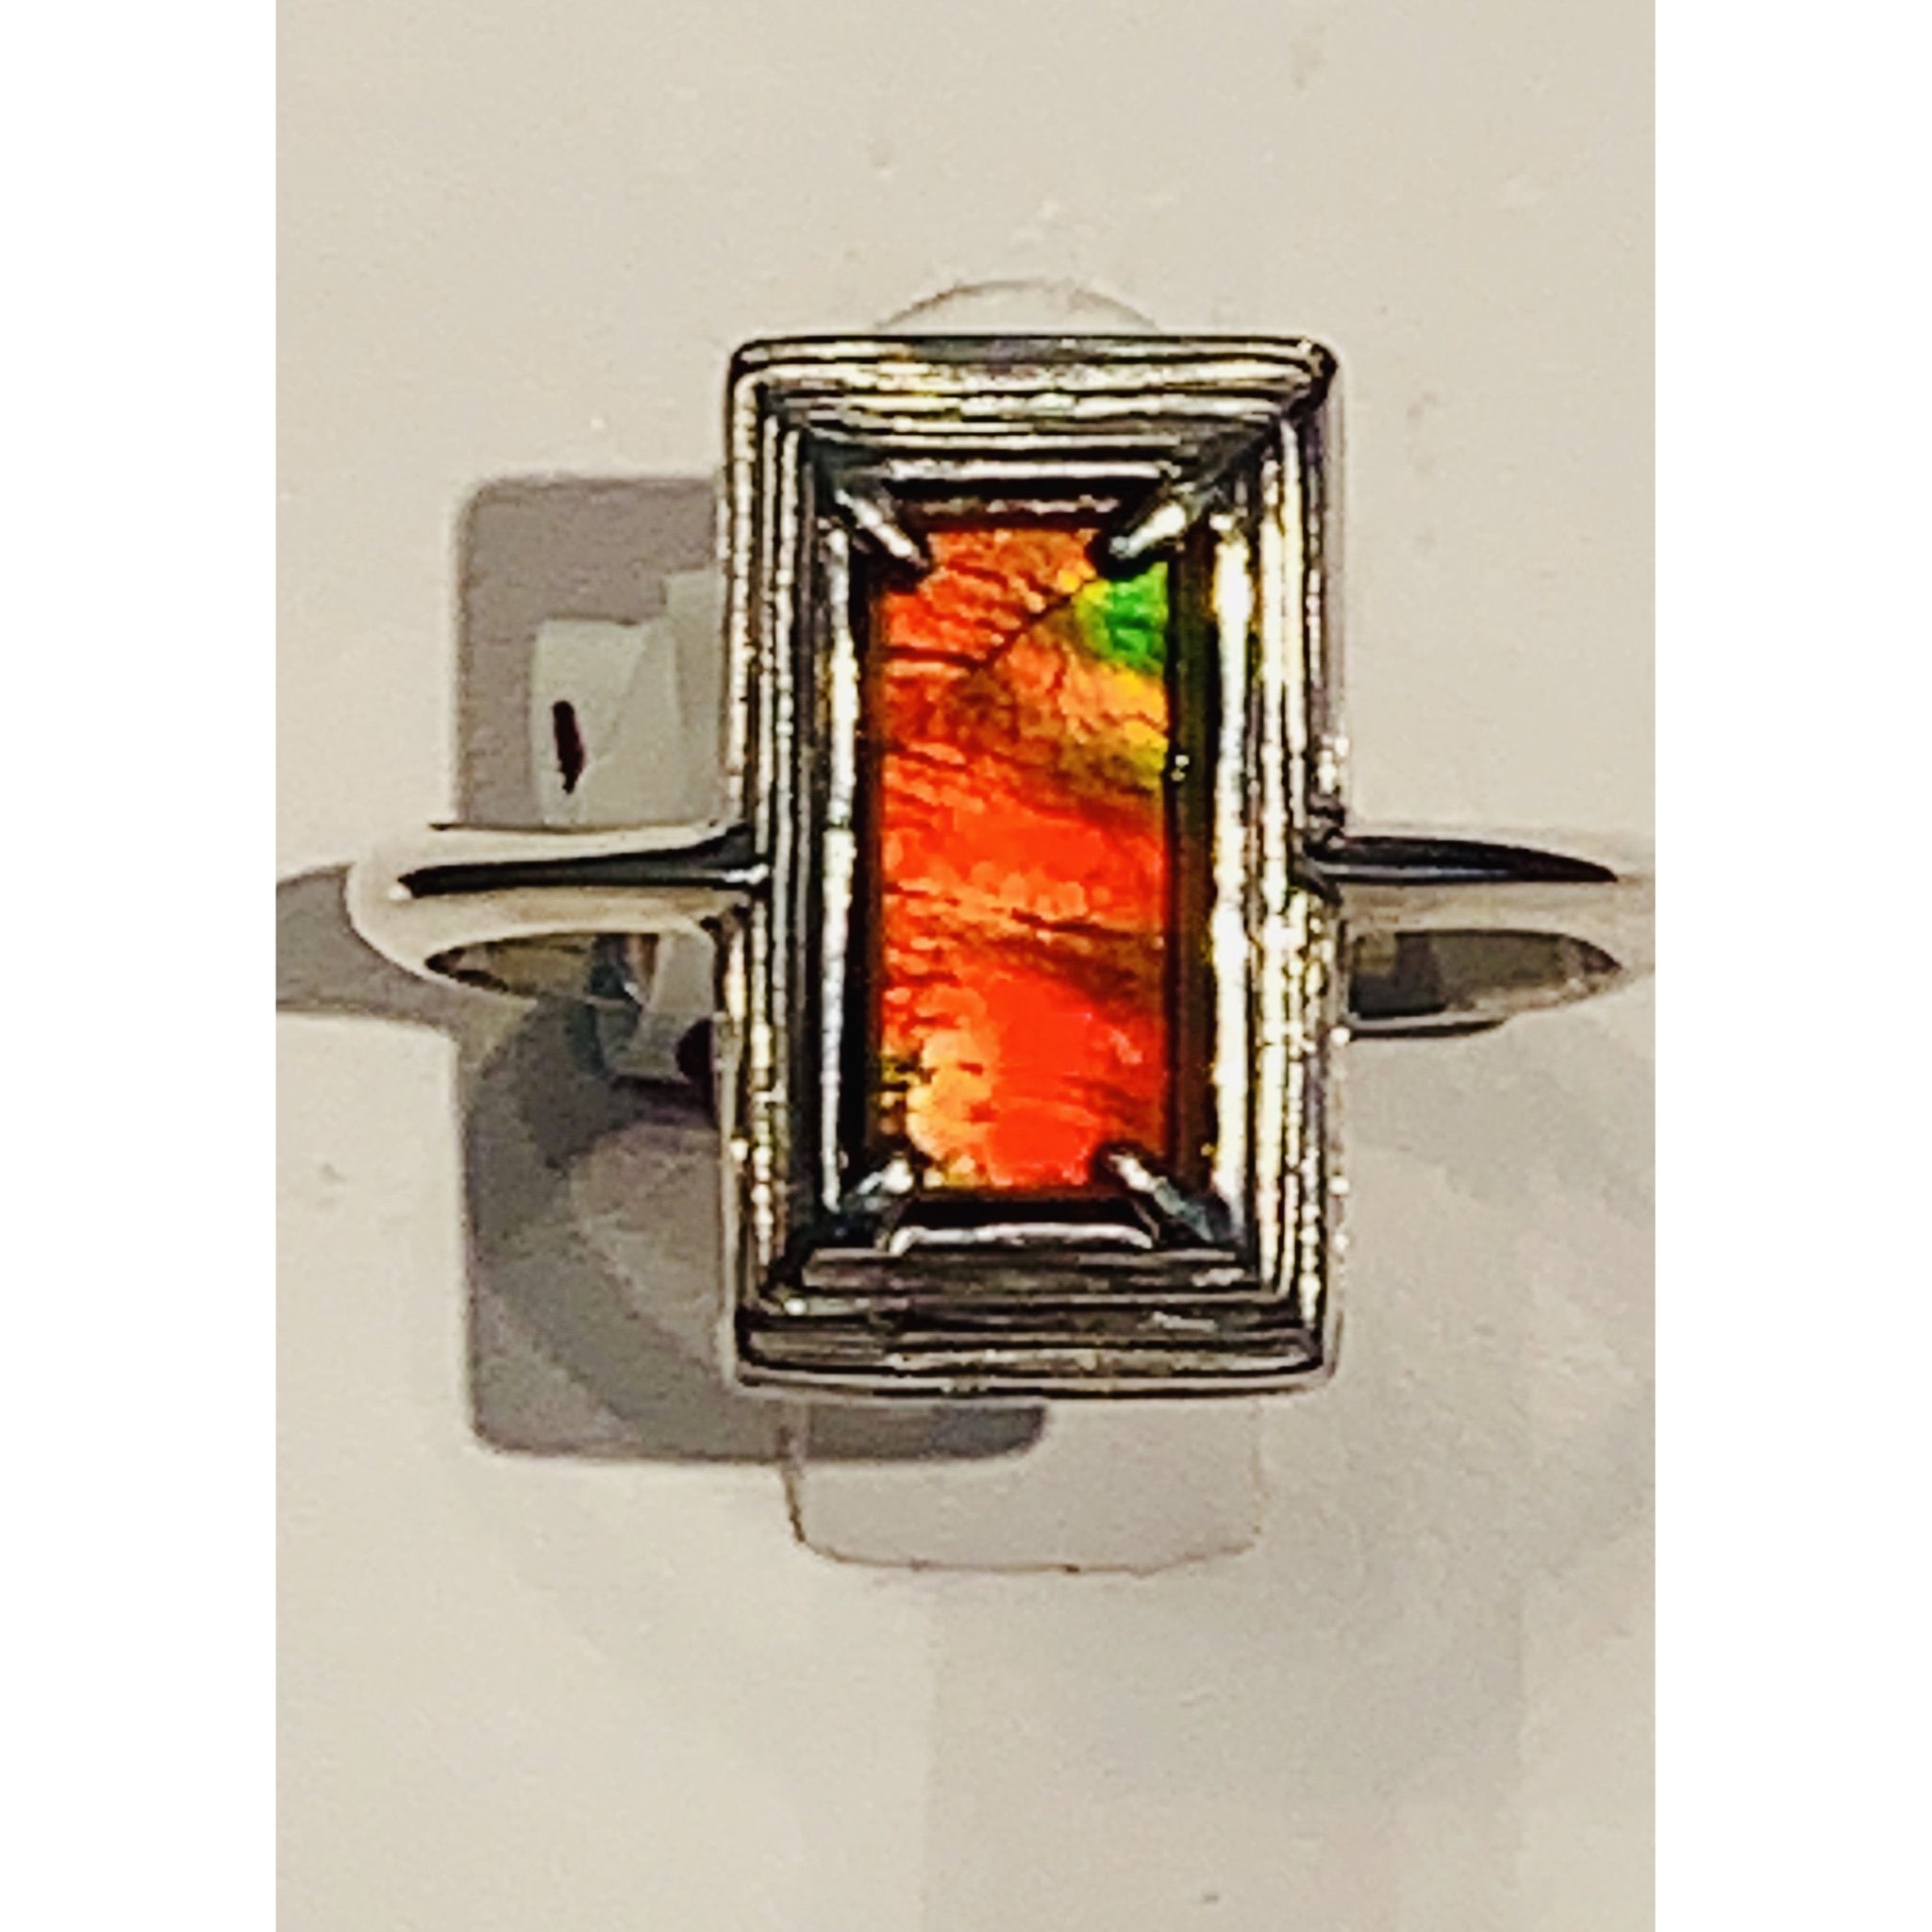 Ammolite Pyramid Ring with 5x10mm Gemstone Set in Silver  PN: E20894 %product from Empire Ammolite